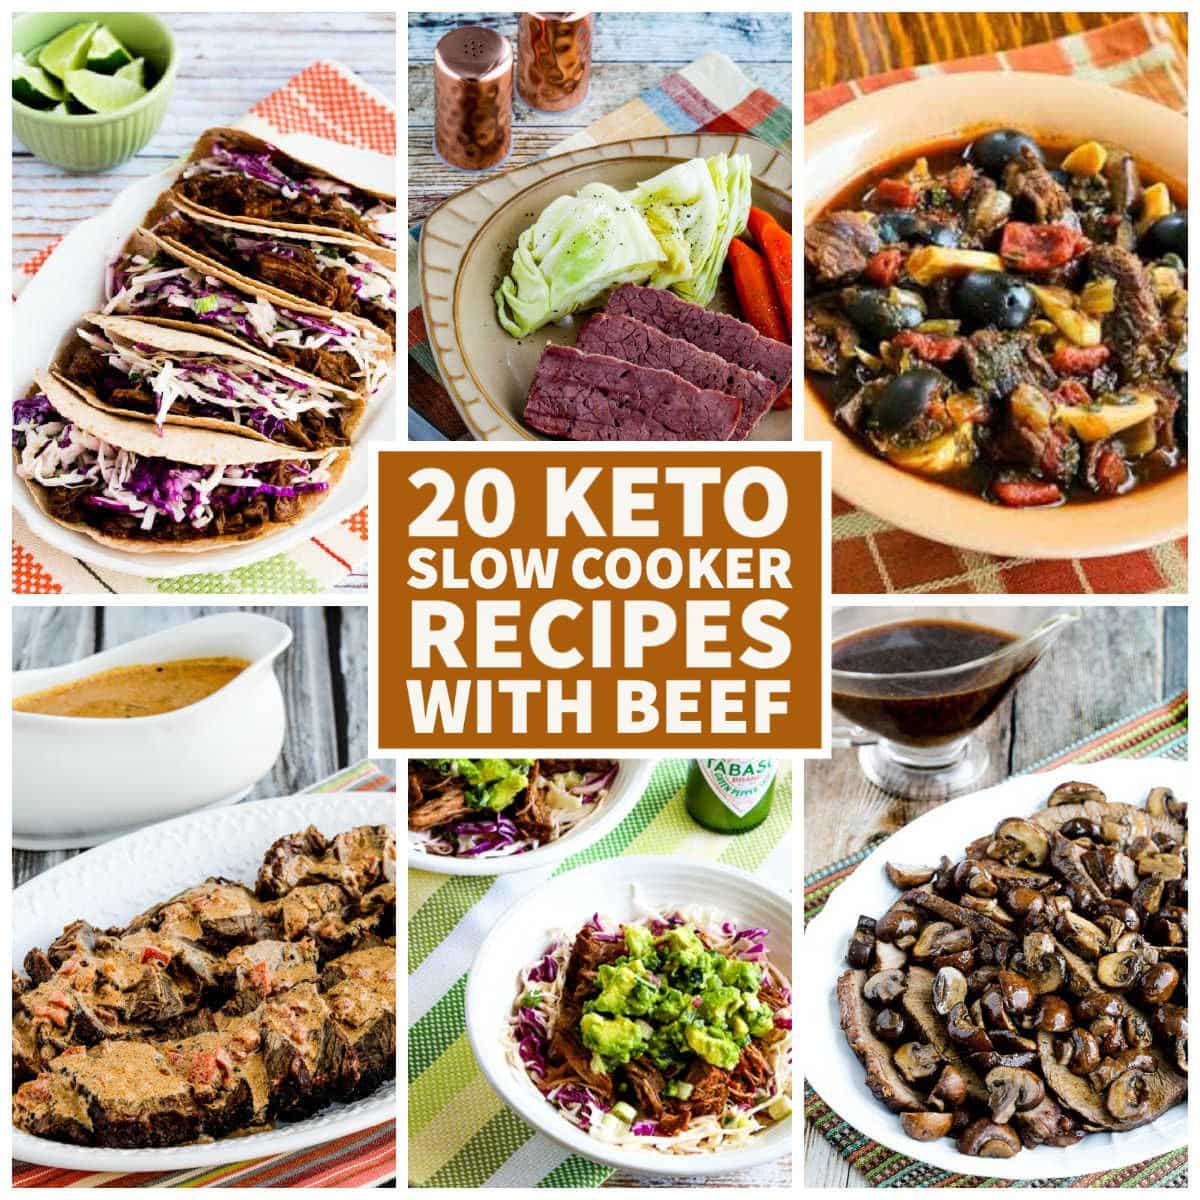 20 Keto Slow Cooker Recipes with Beef collage with text overlay showing featured recipes.